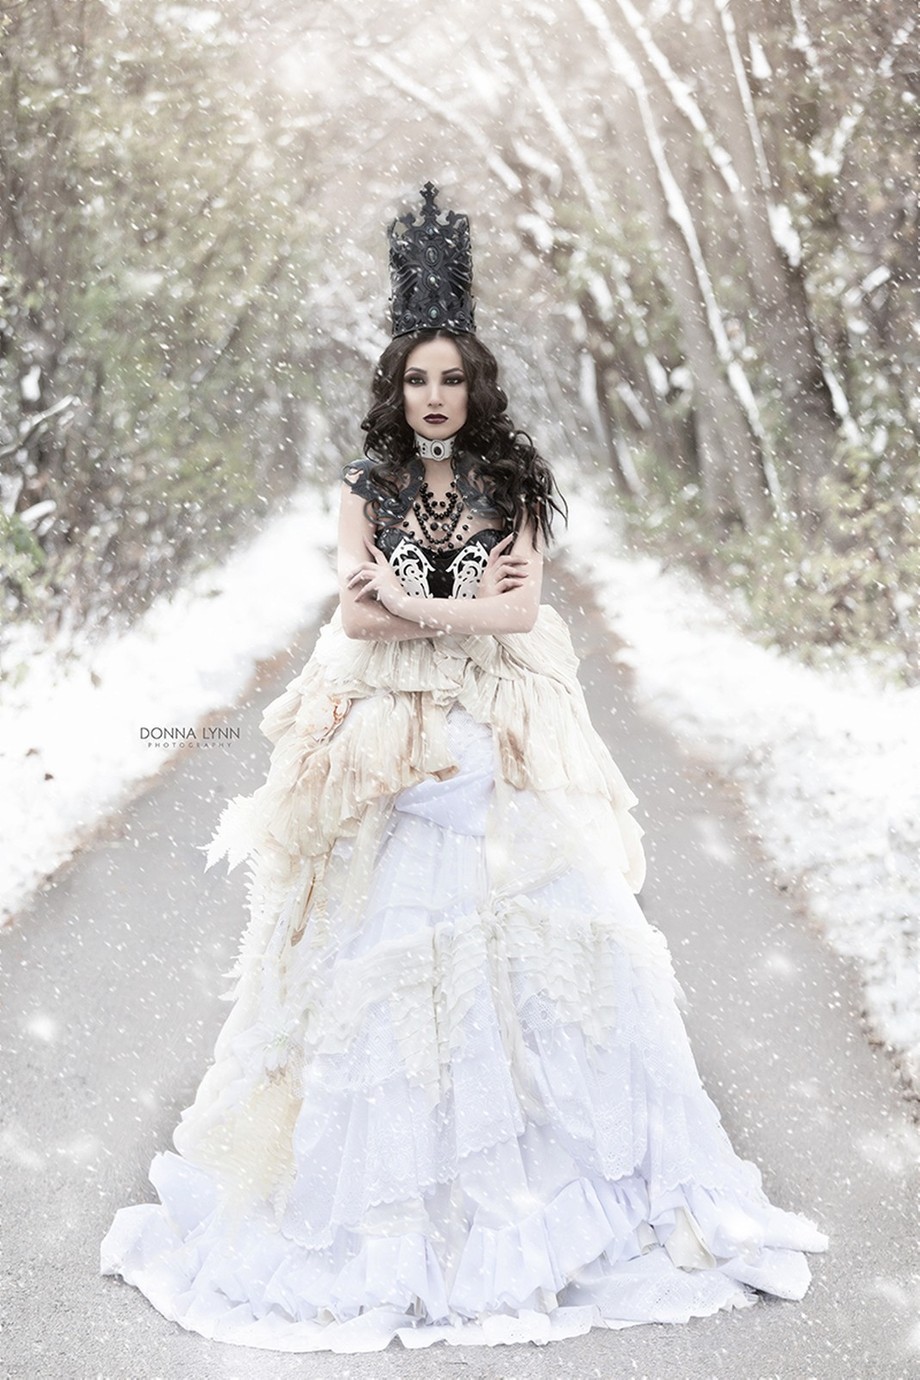 Winter Queen by DonnaLynnPhotog - A Fantasy World Photo Contest